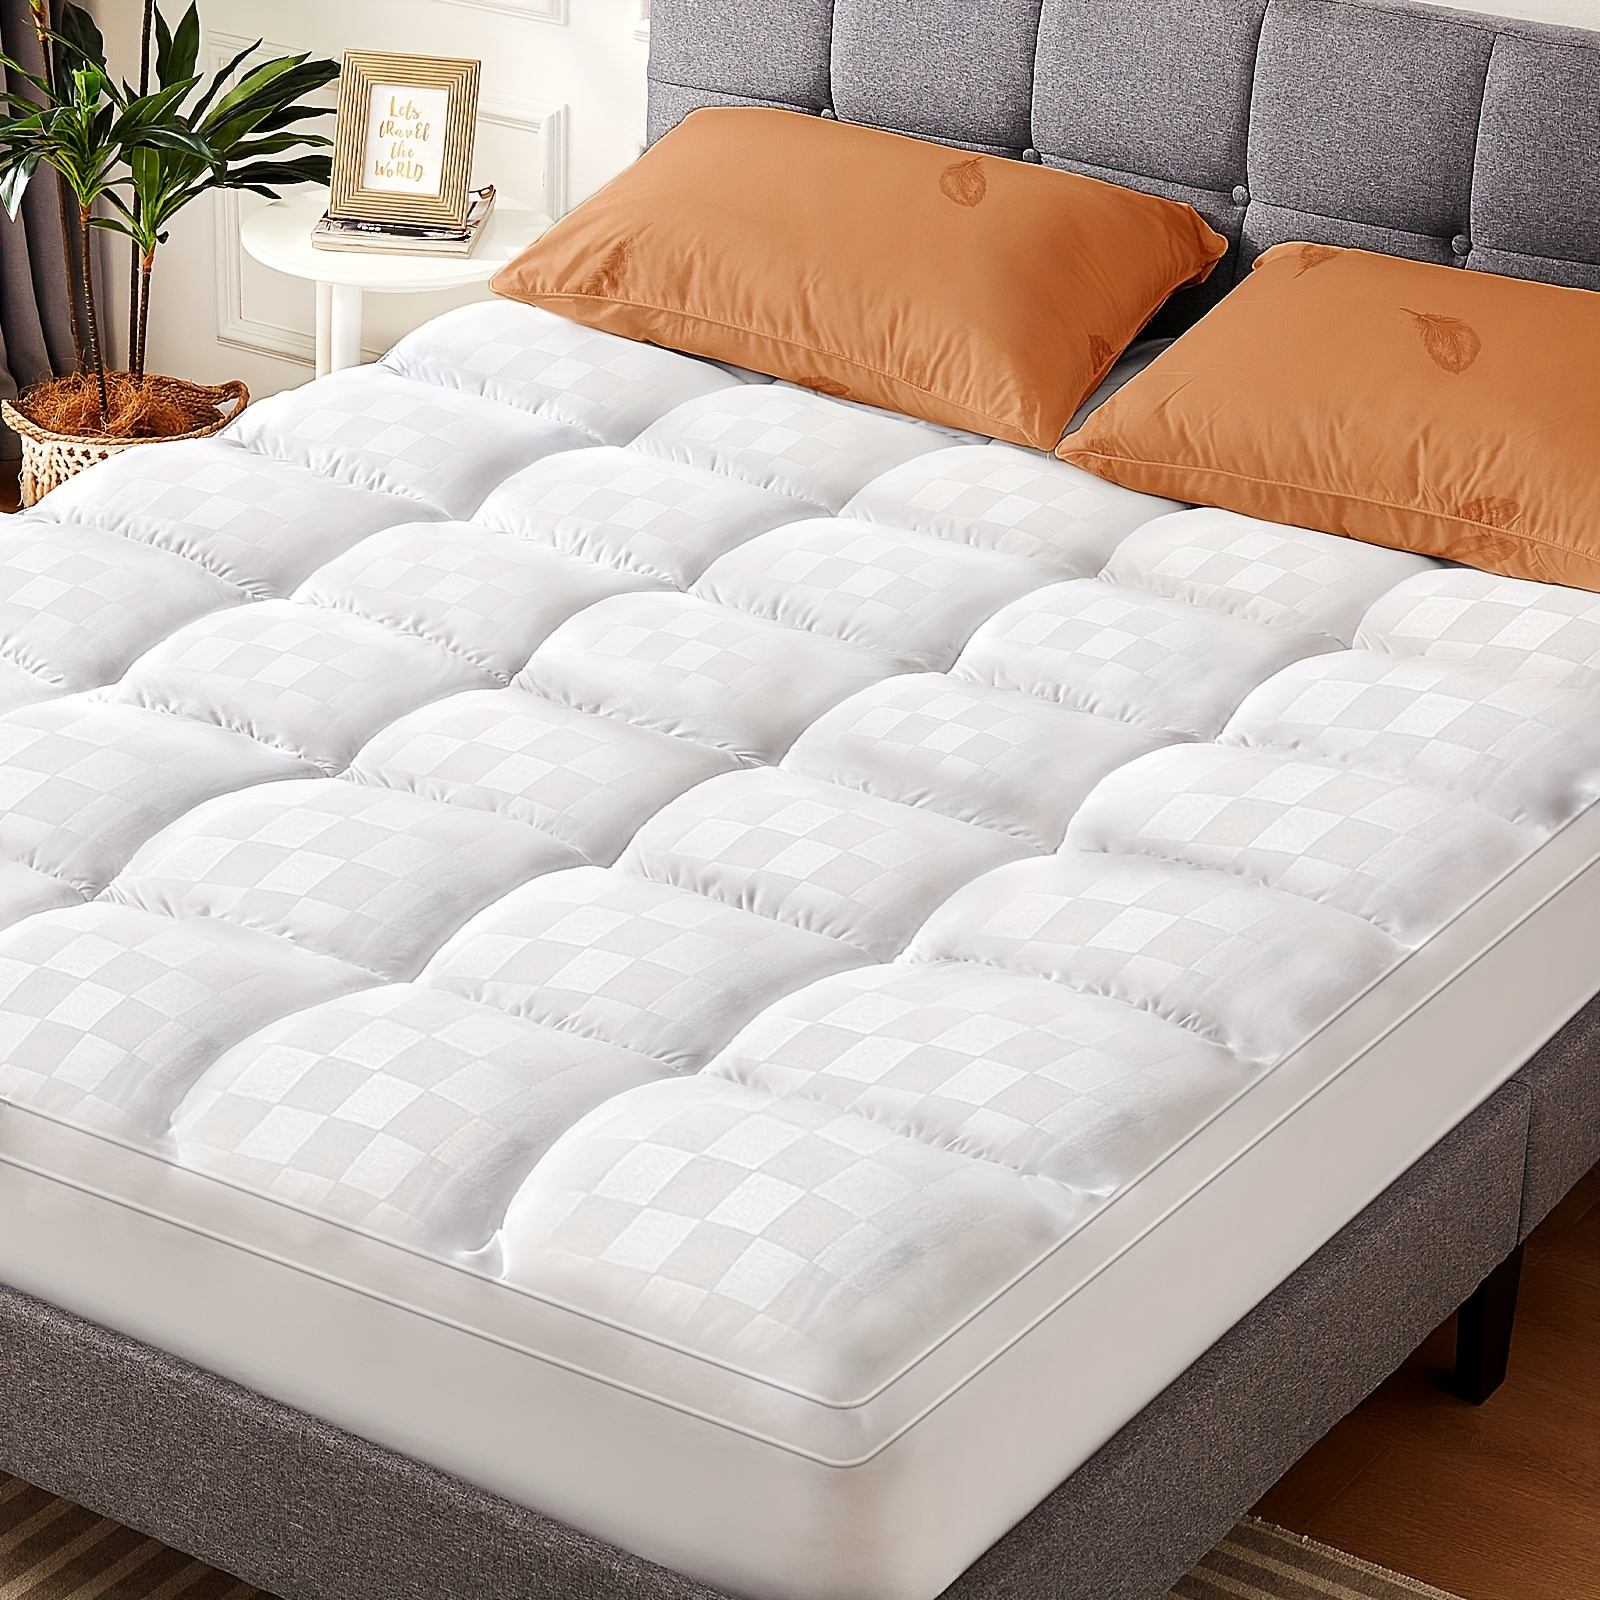 

800gms Mattress Topper For , Extra Thick Mattress Pad Cover, Plush Soft Pillowtop With Elastic Deep Pocket, Overfilled Down Alternative Filling